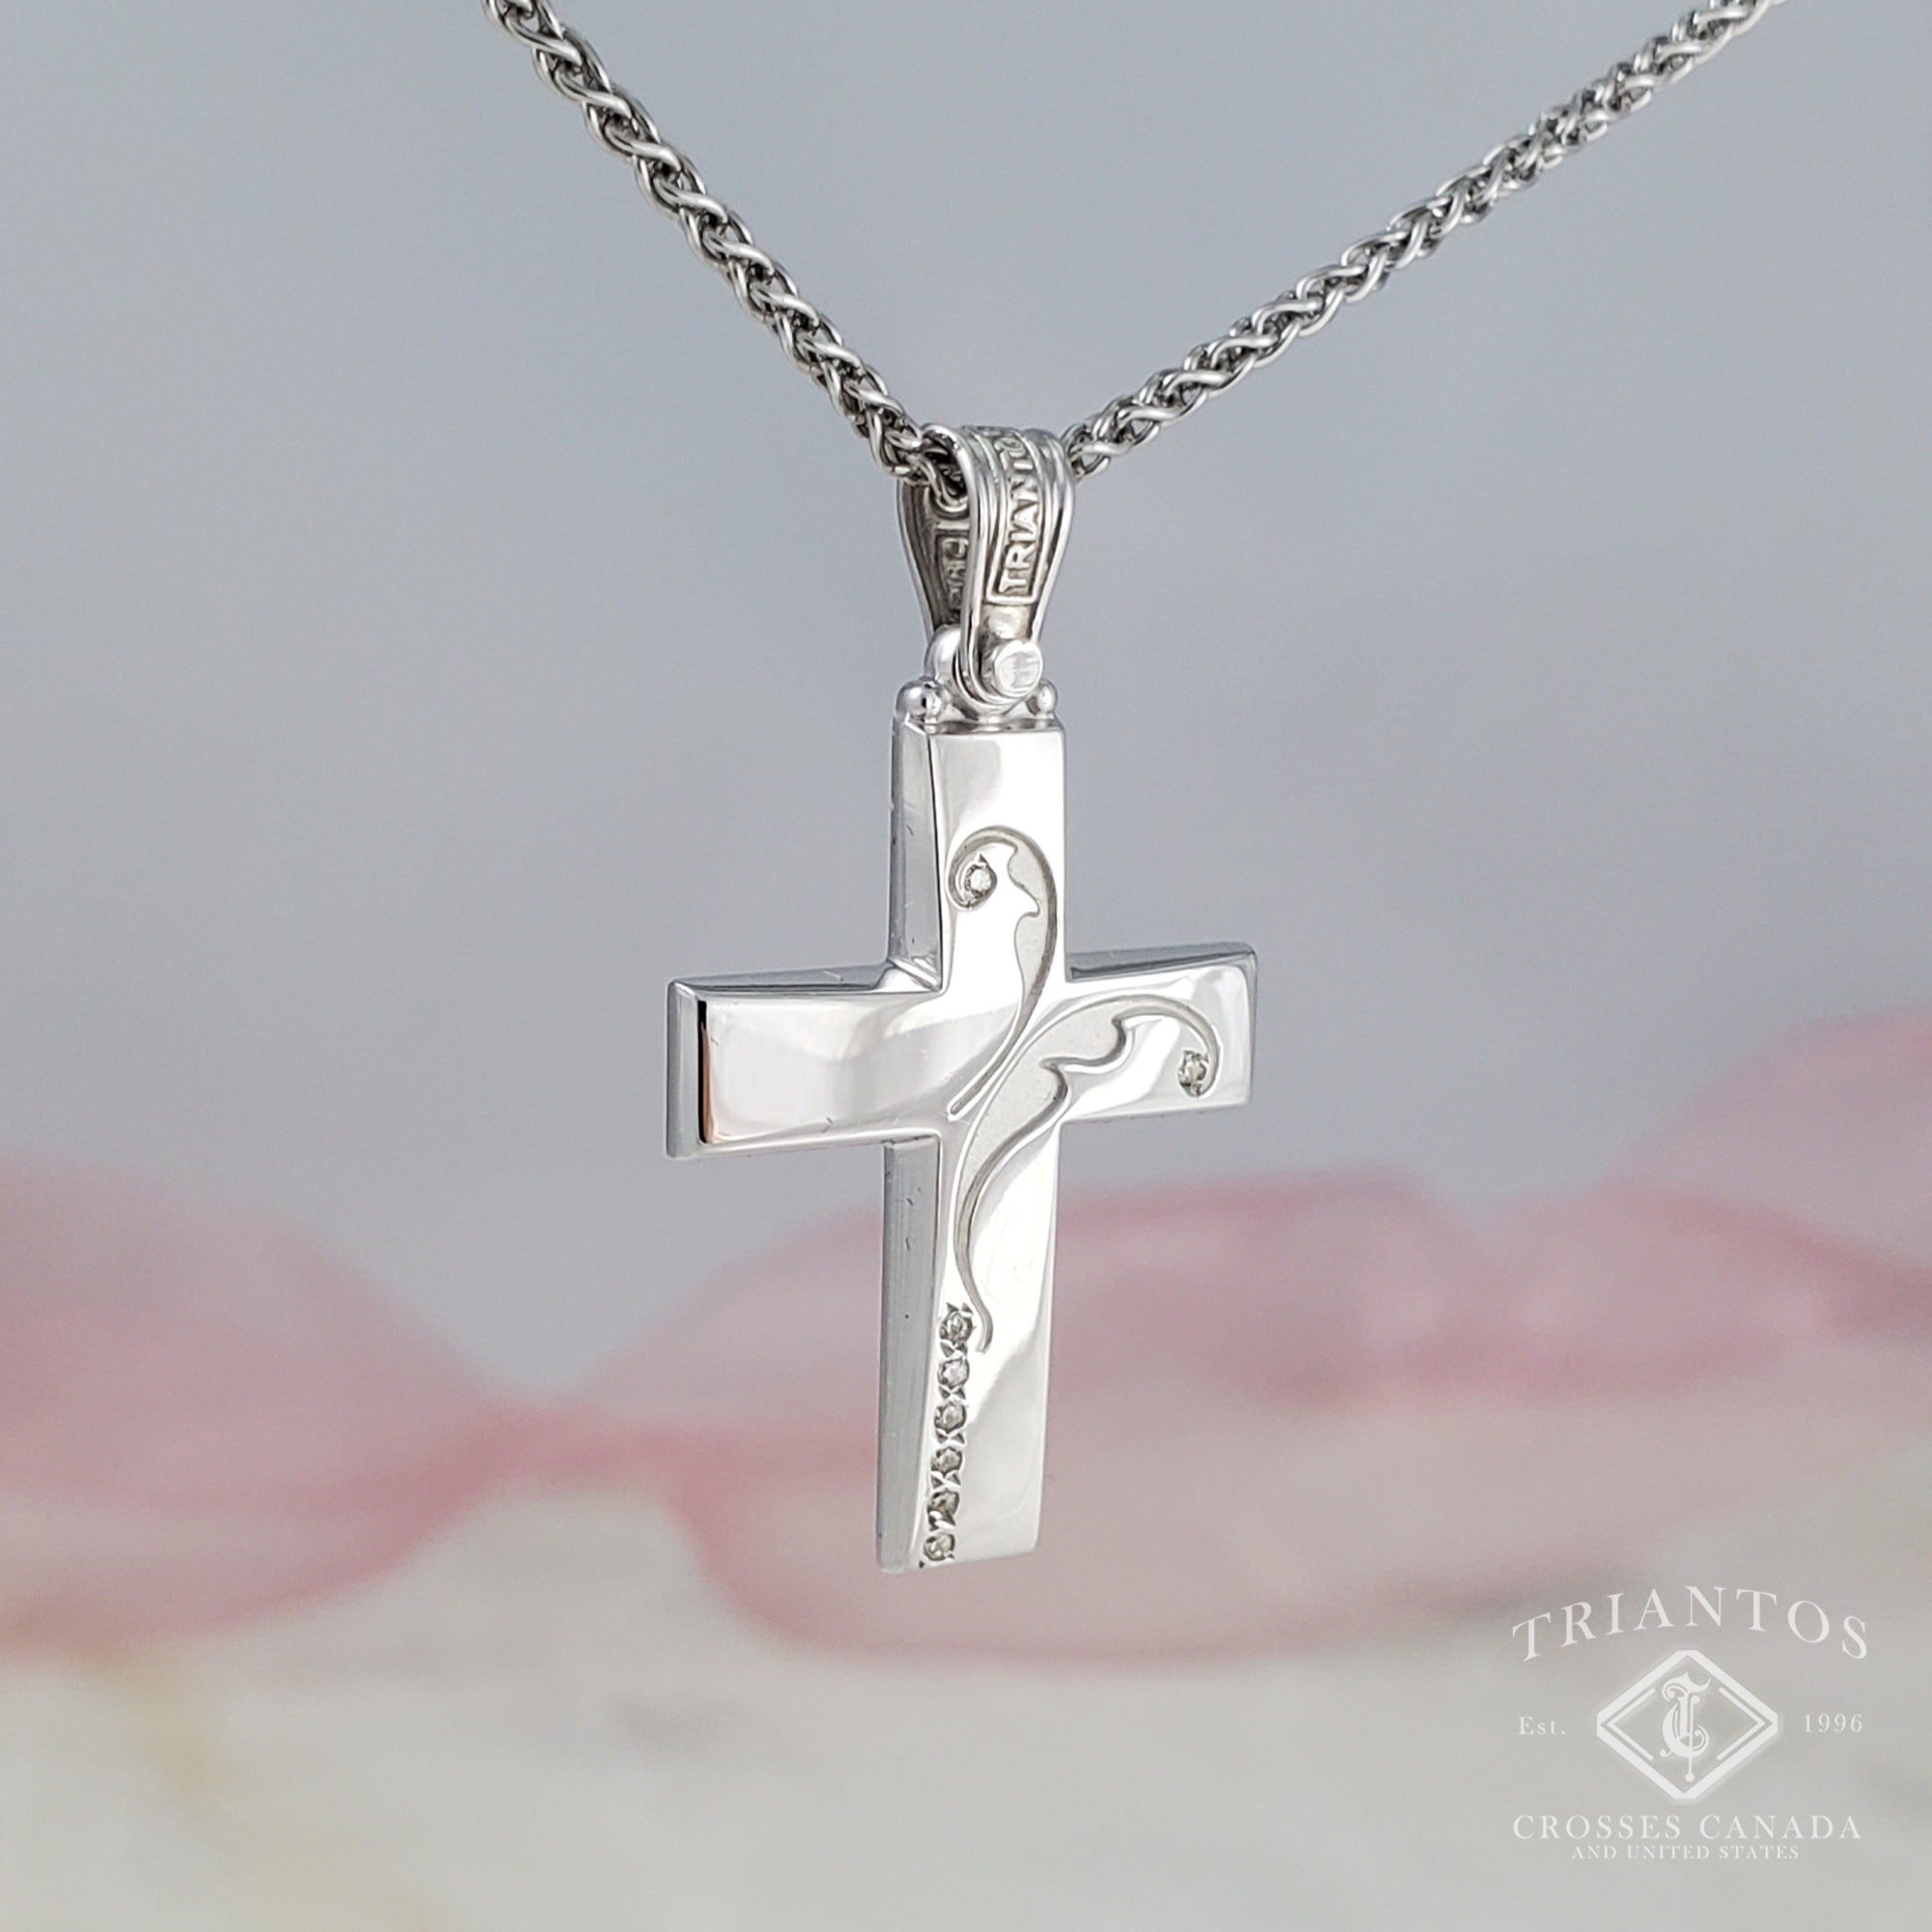 Personalized Cross Necklace with Snake Chain | Custom Heart Design